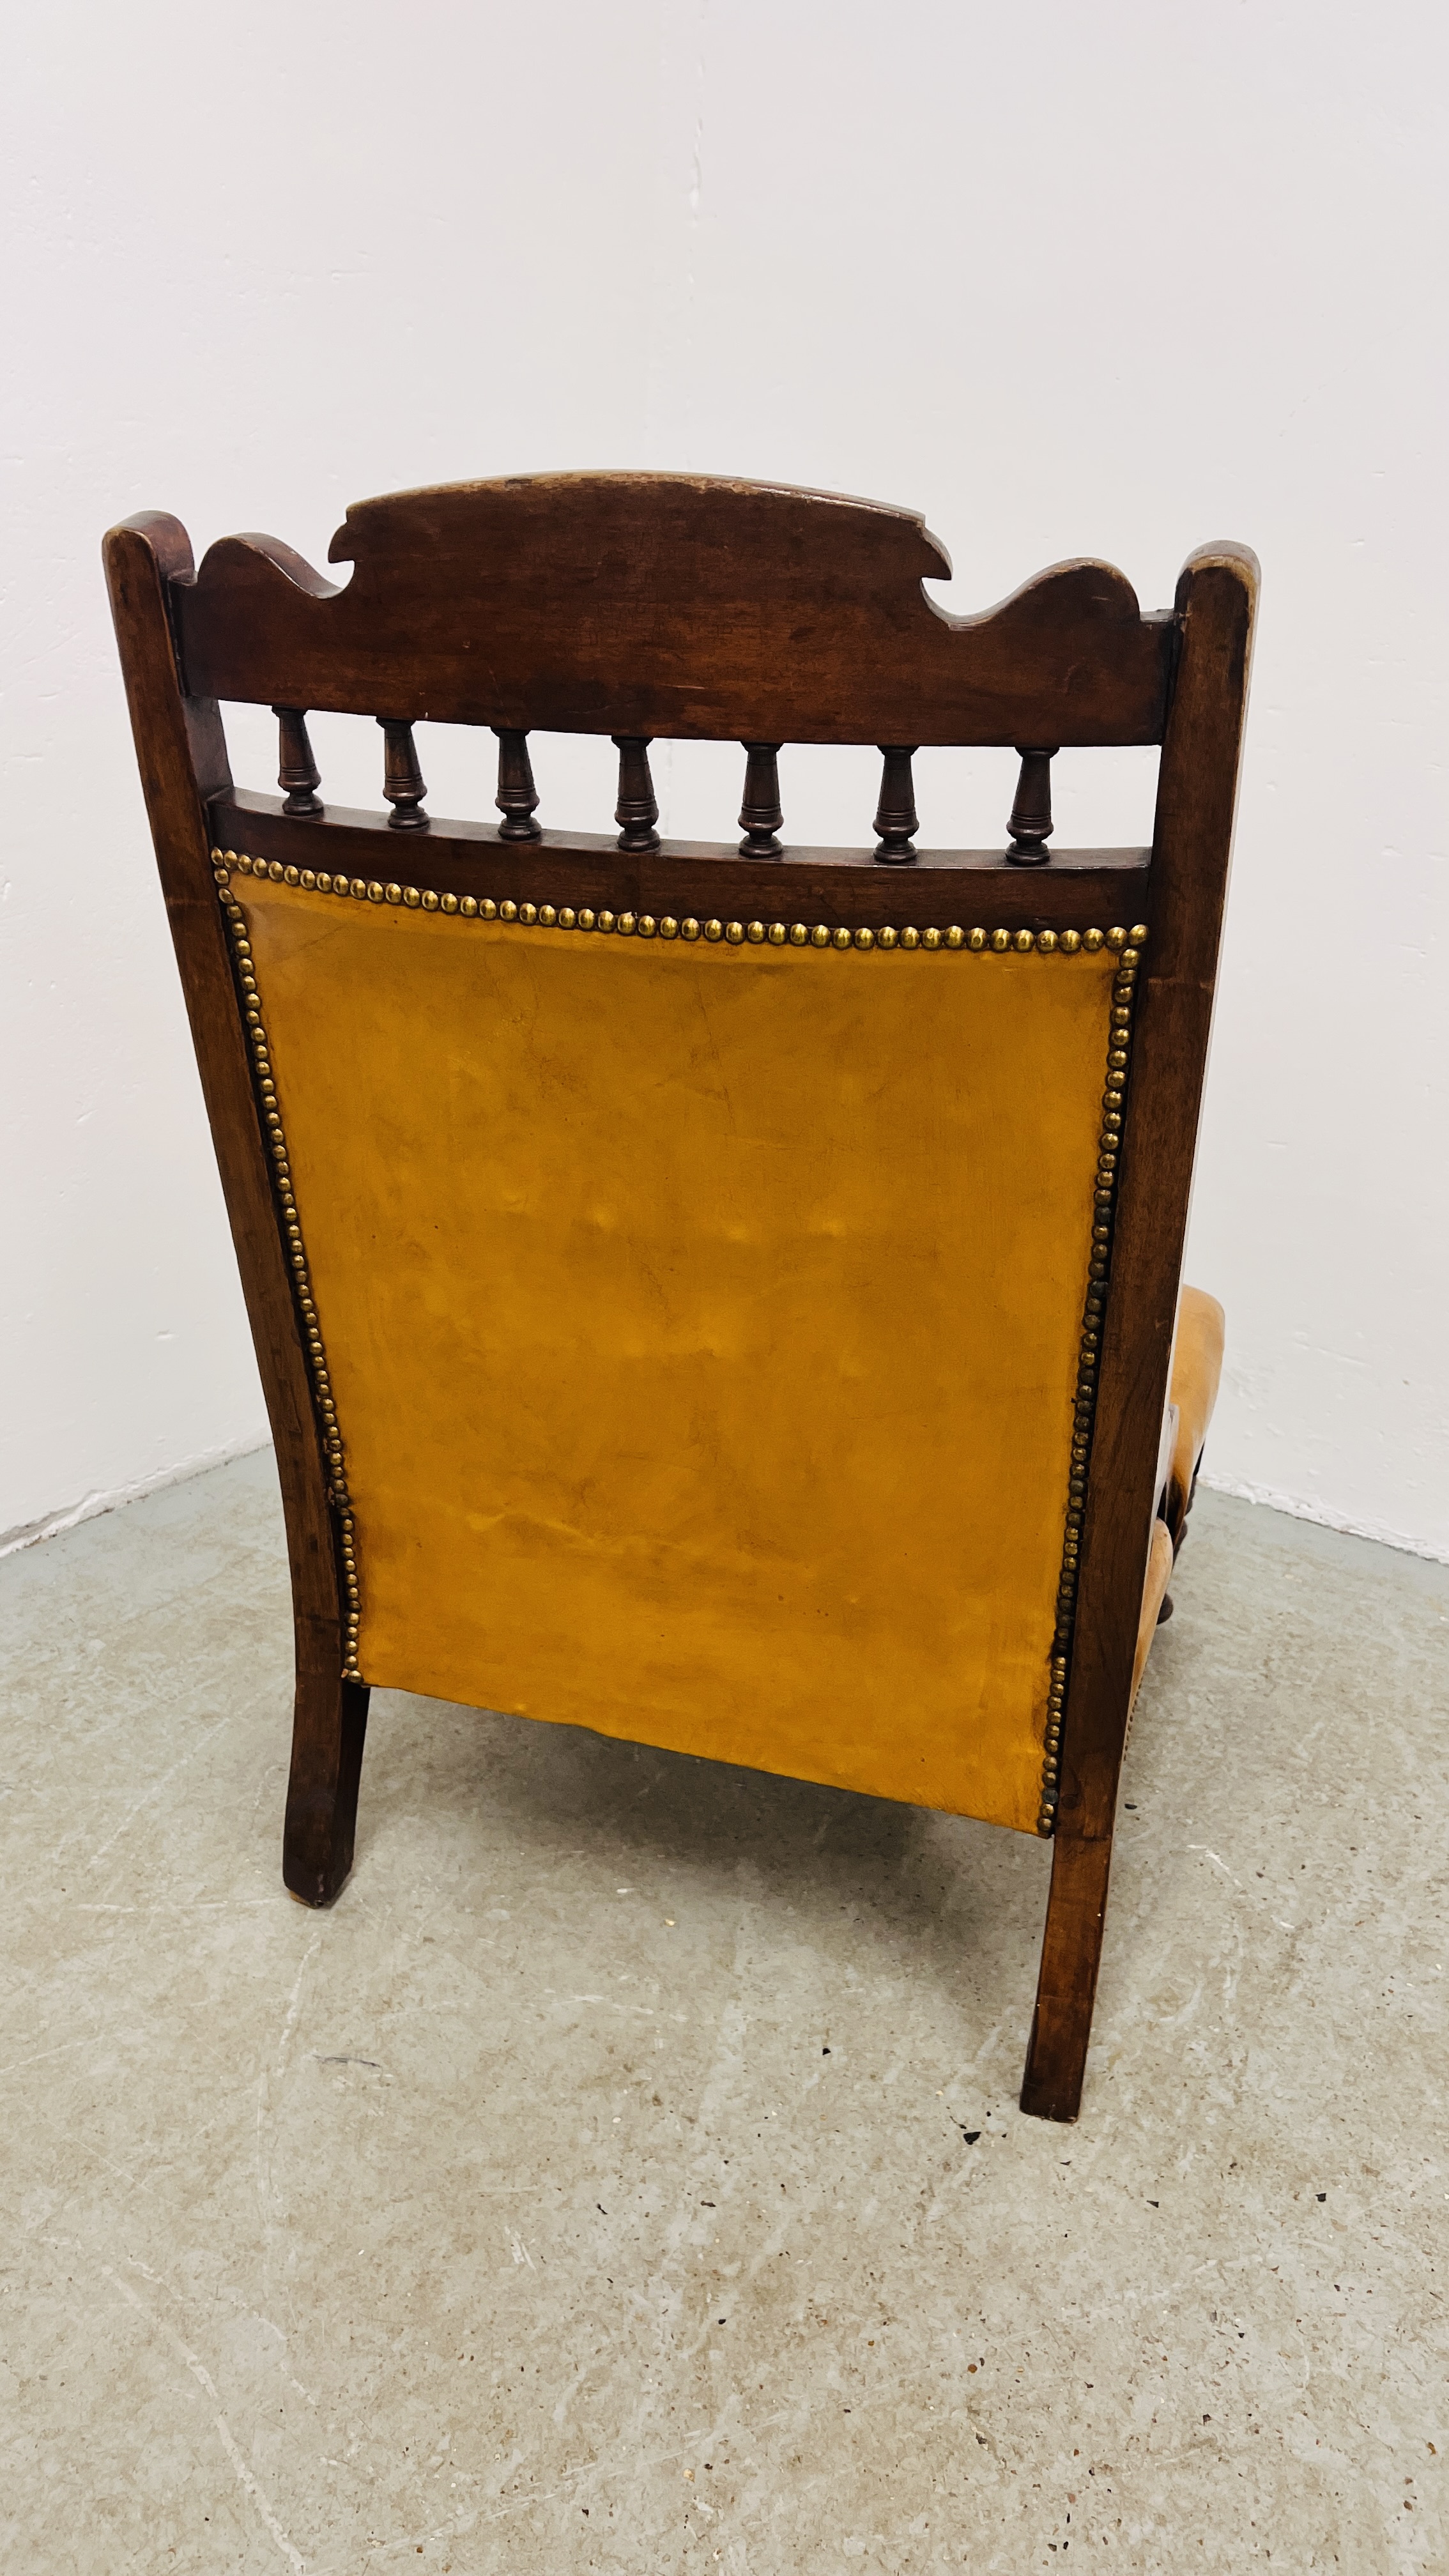 ANTIQUE EDWARDIAN MAHOGANY LOW CHAIR UPHOLSTERED IN TAN LEATHER - BUTTON BACK. - Image 8 of 12